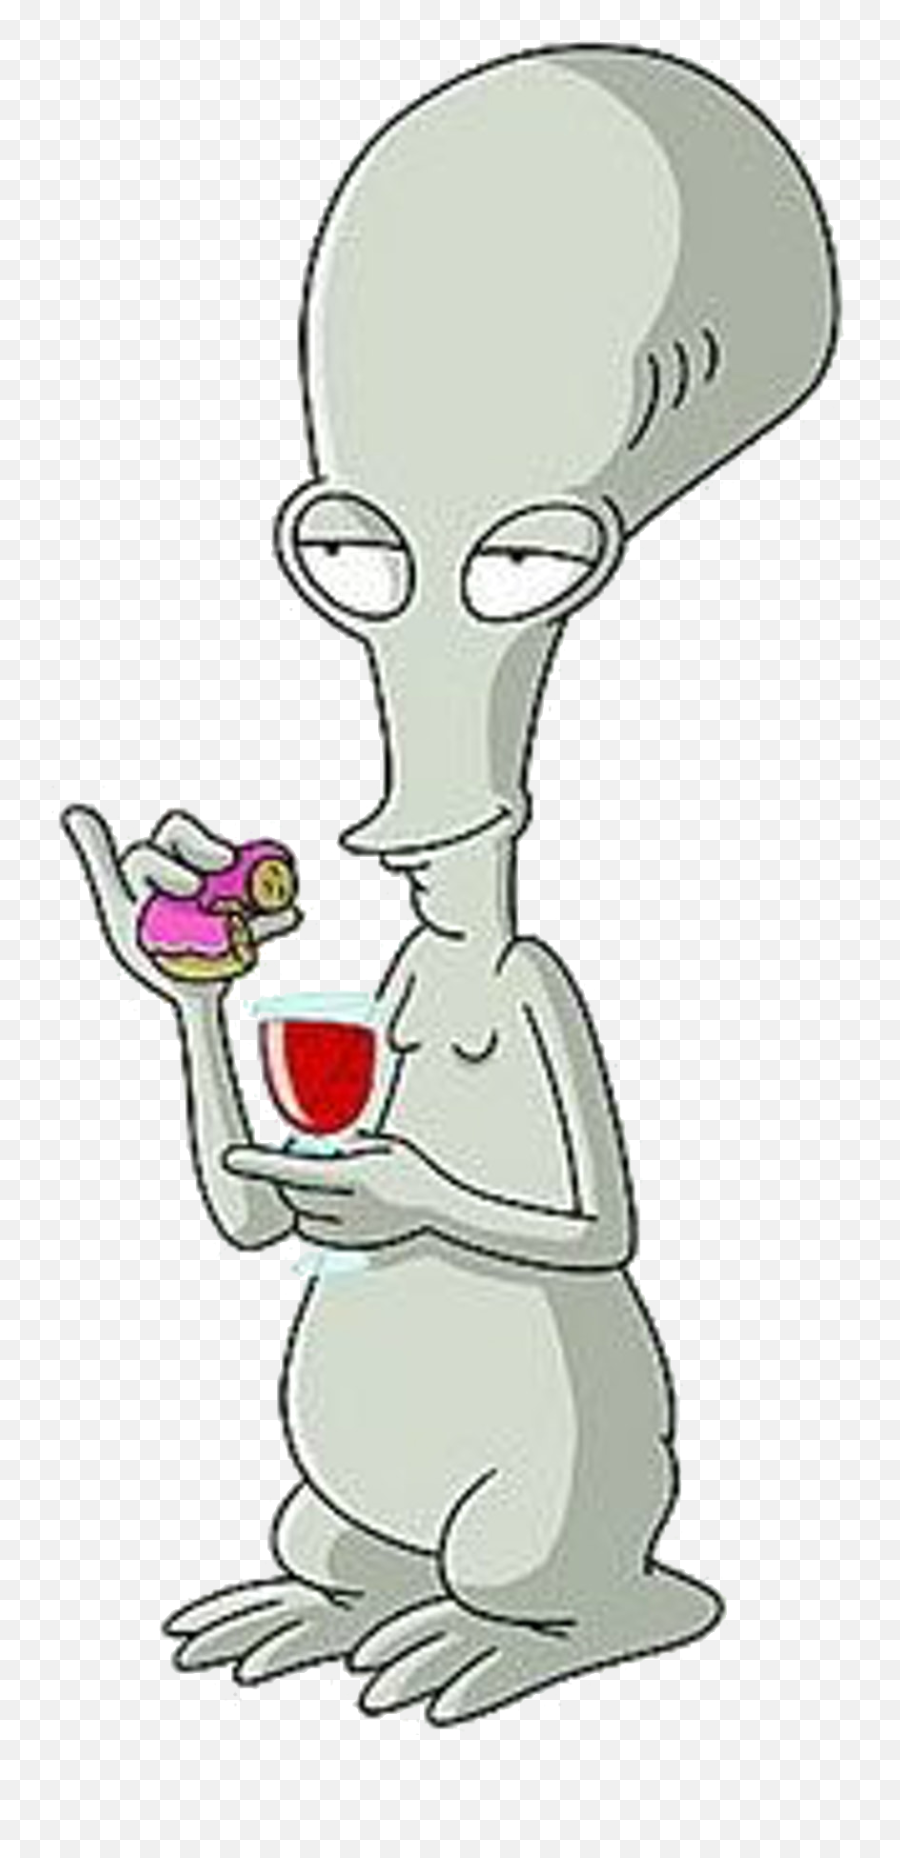 Would You Rather Aliens Be Robots Or Humans - Quora Roger American Dad Png Emoji,Alien Star Trek That Fed On Energy Released By Human Emotion